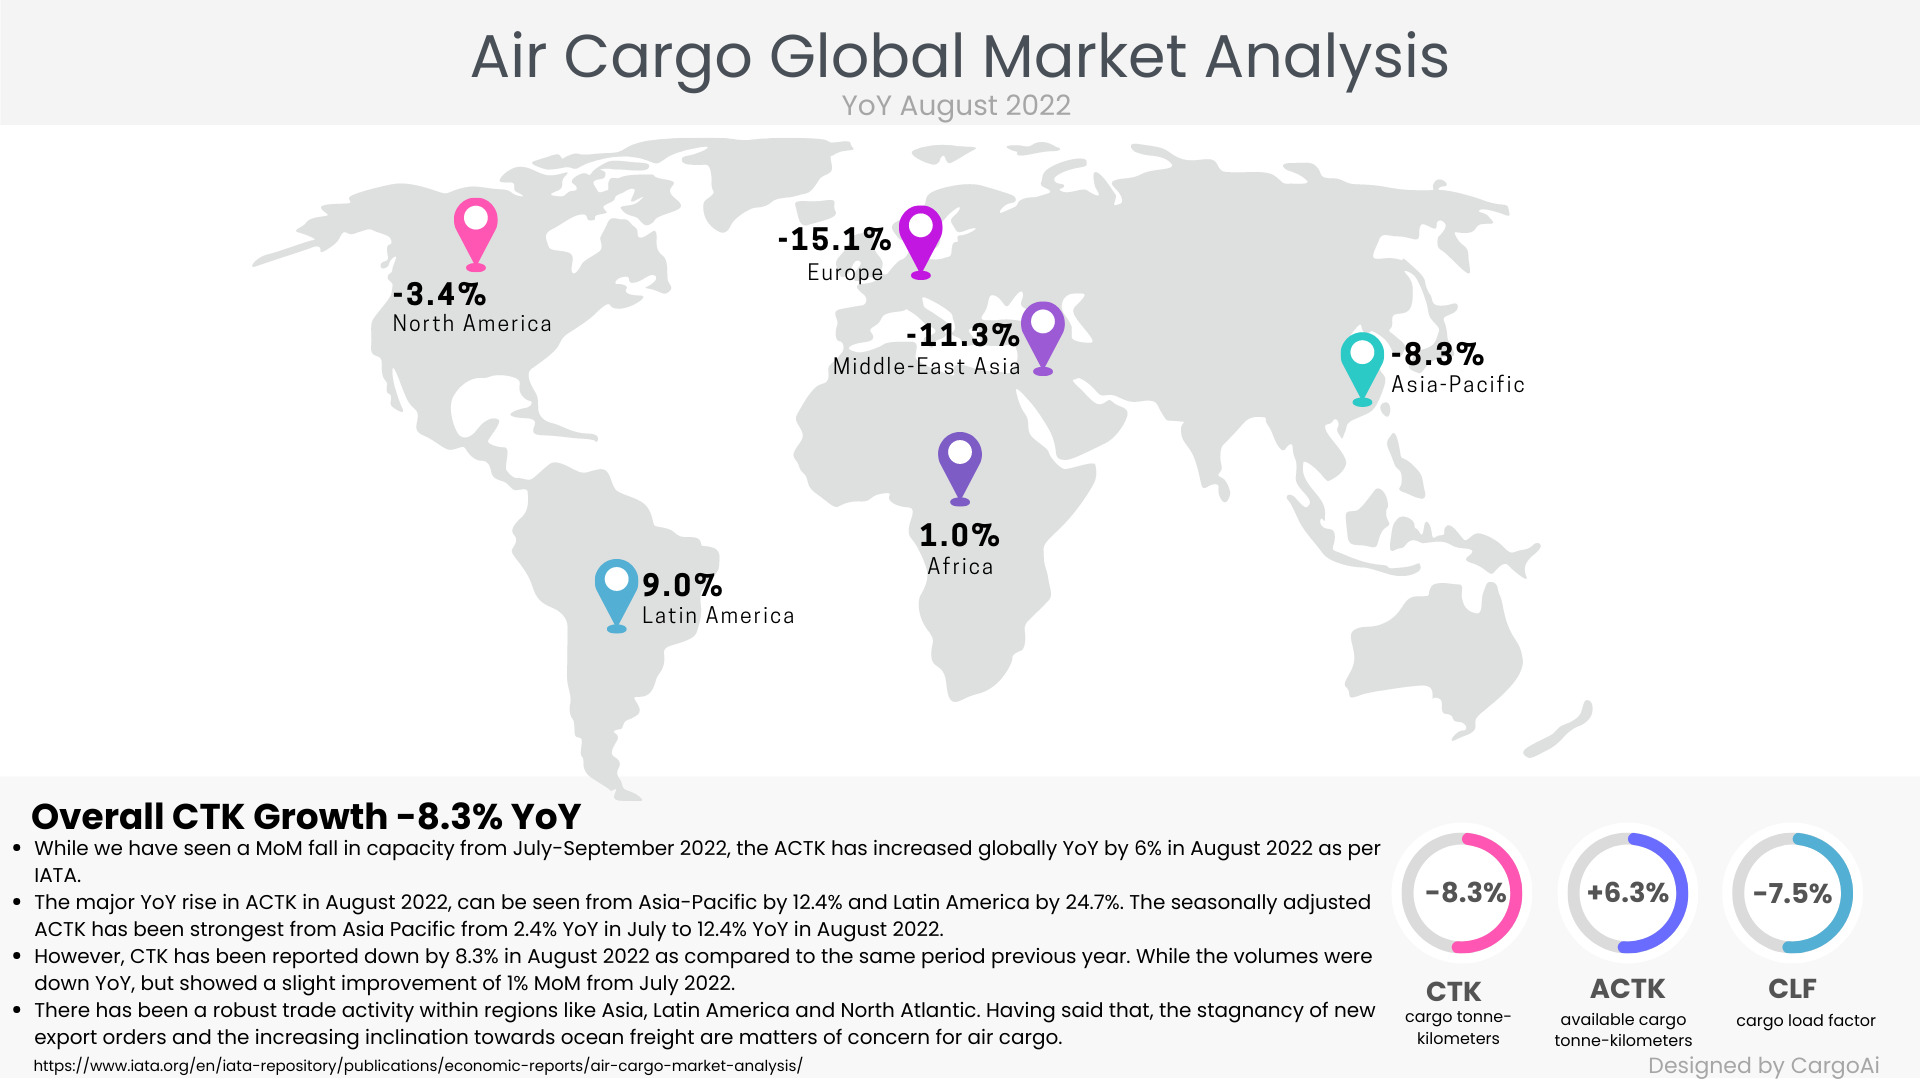 Air Cargo Global chargeable weight analysis of Sep 2022